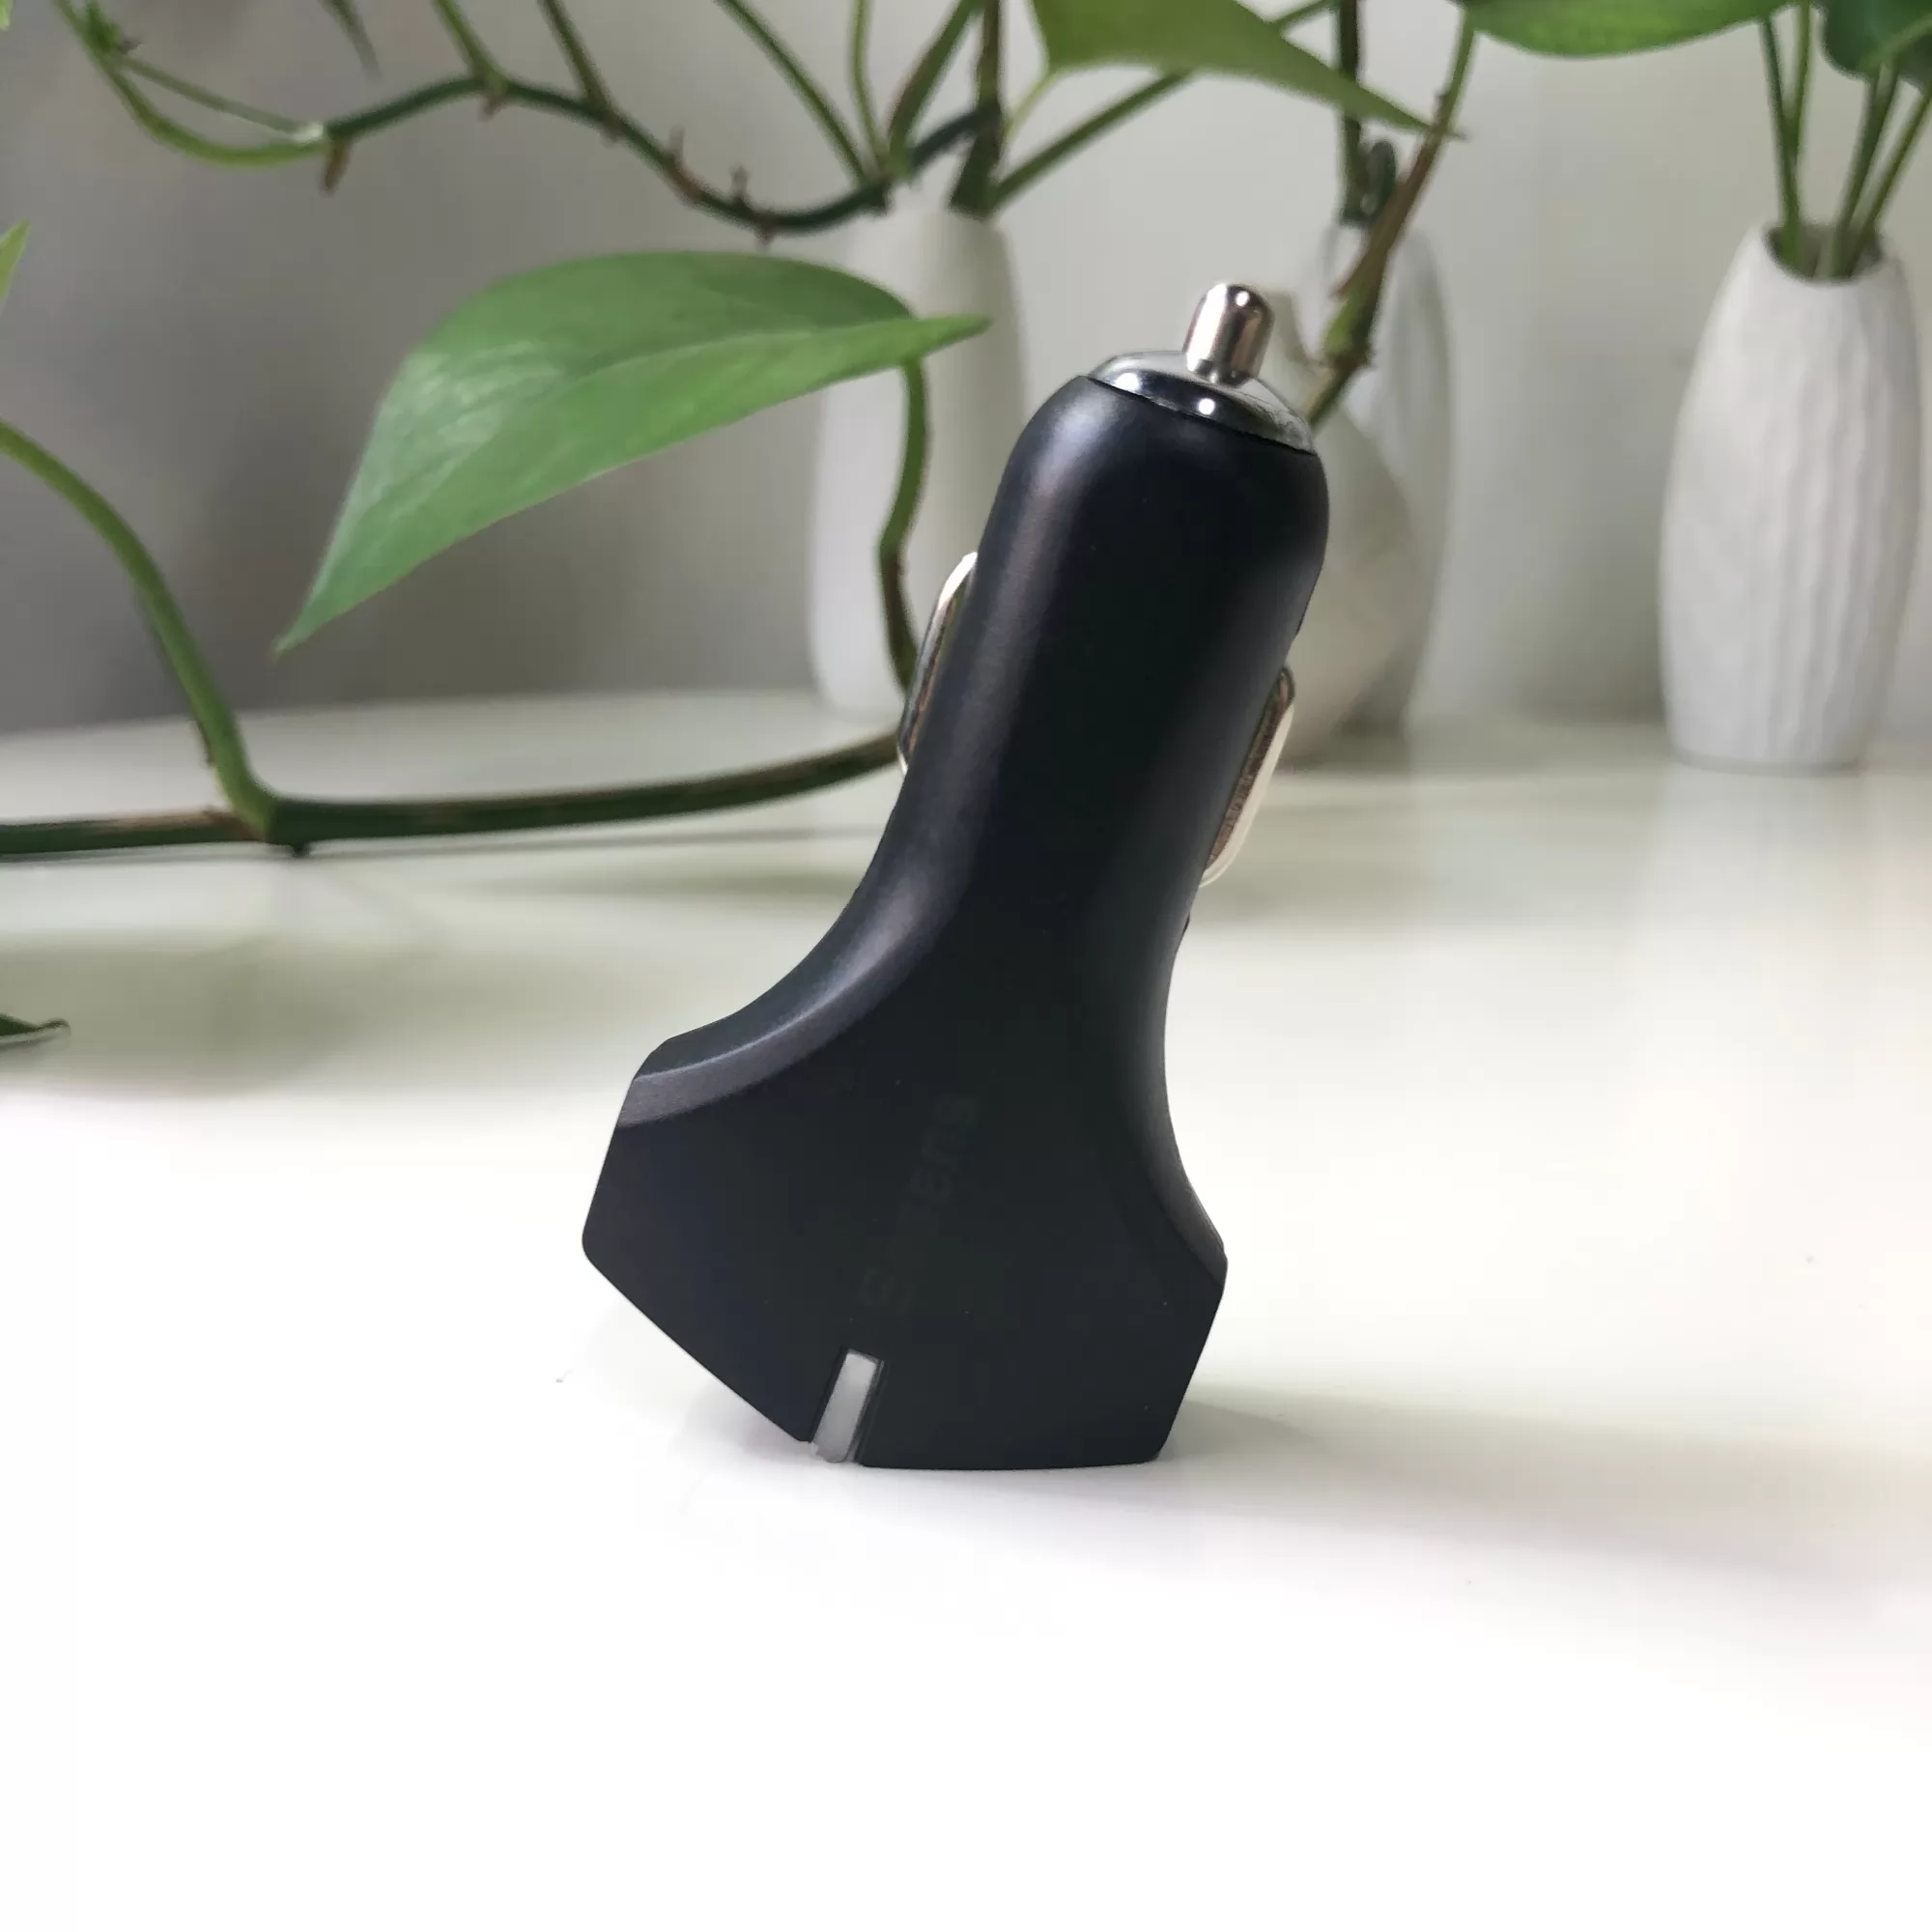 GK-CC008 Triangle Car Charger